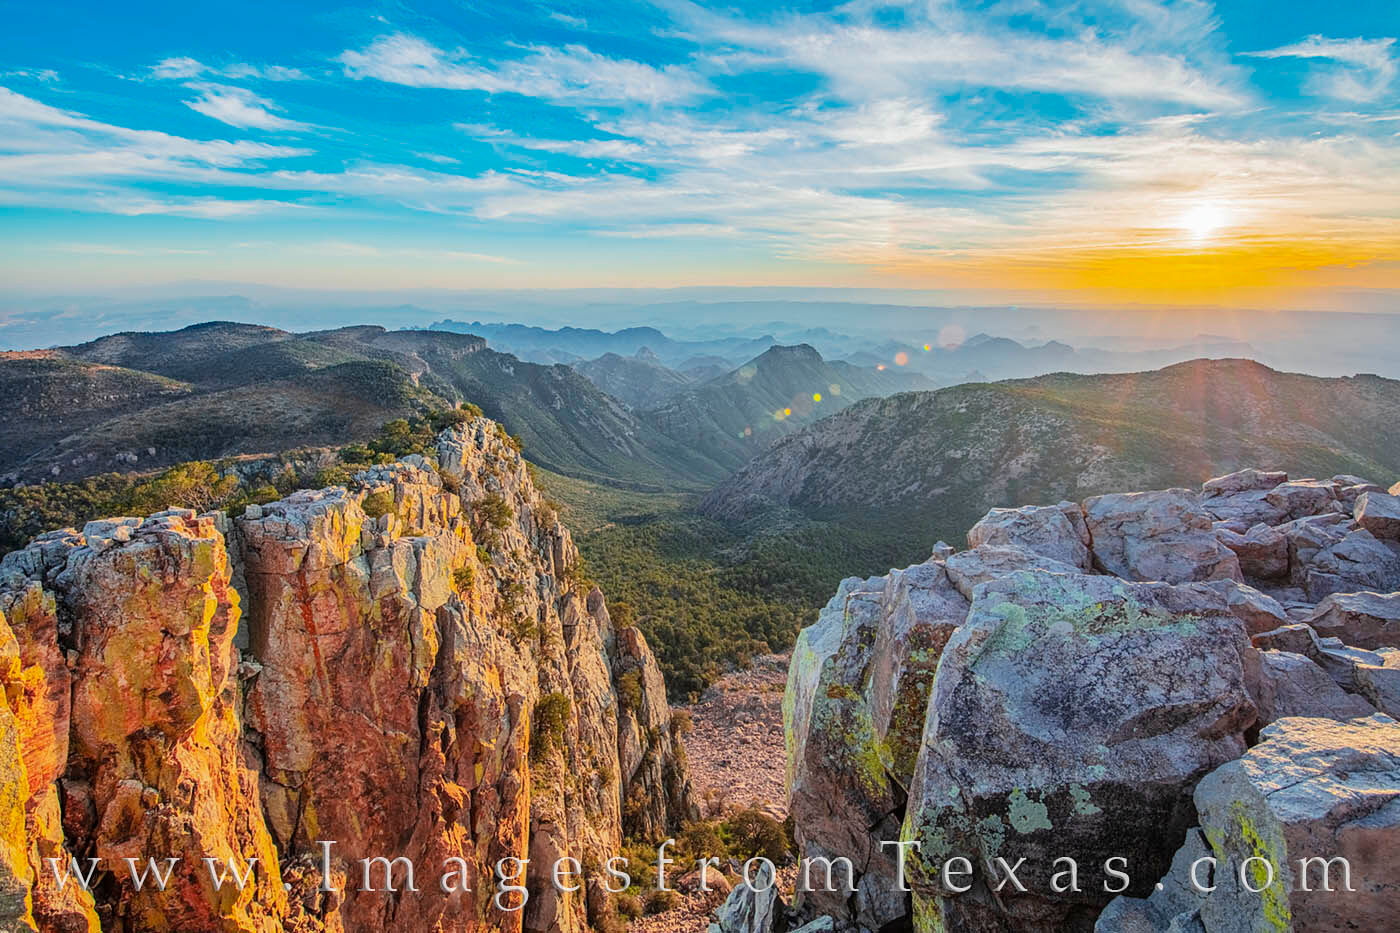 From the top of Emory Peak, Big Bend National Park's highest point at 7825' in elevation, the views of the Chisos Mountains are...